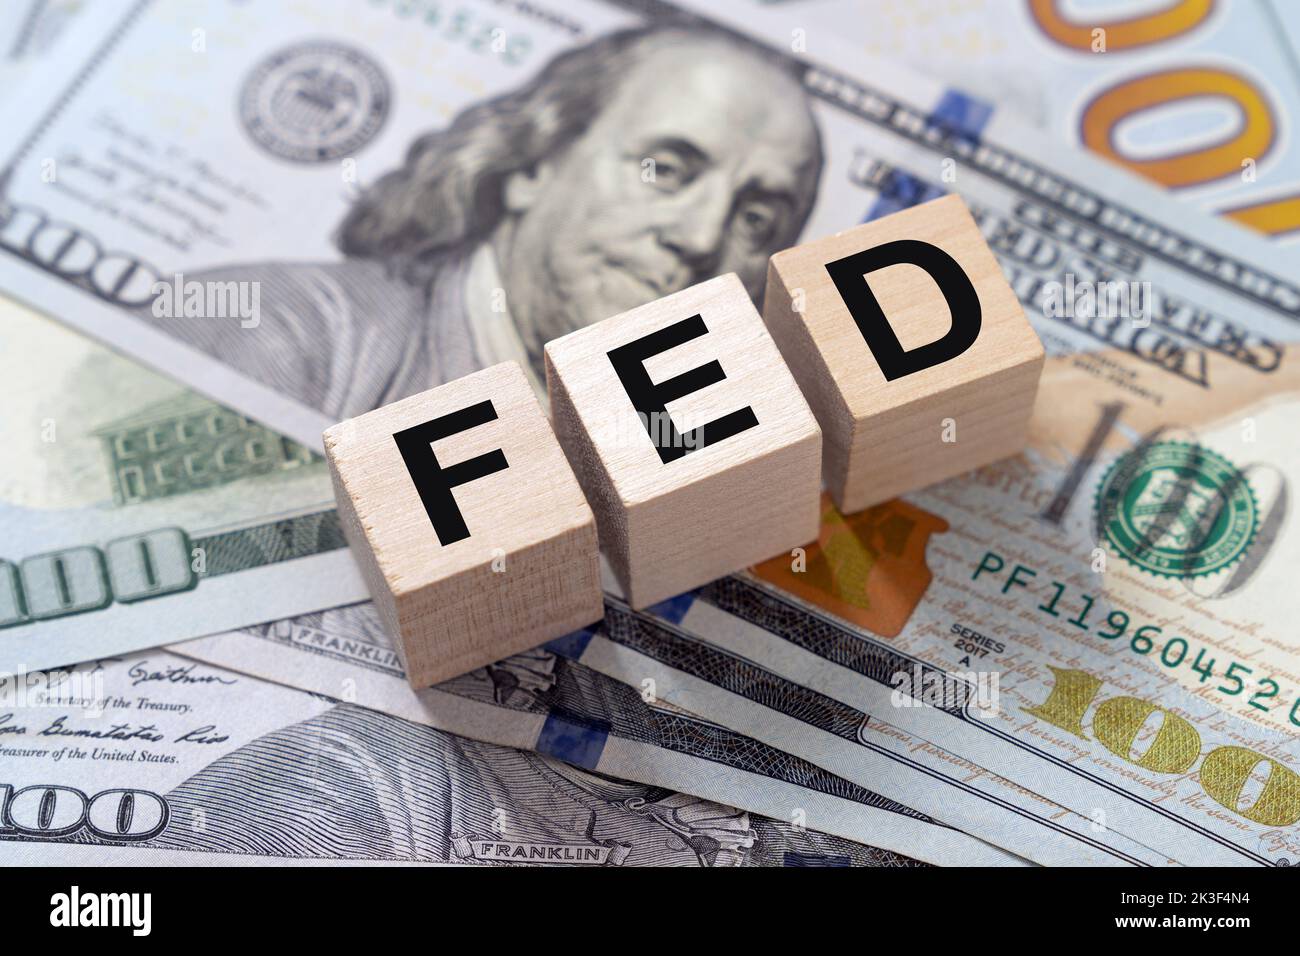 The Federal Reserve to control interest rates. Stock Photo